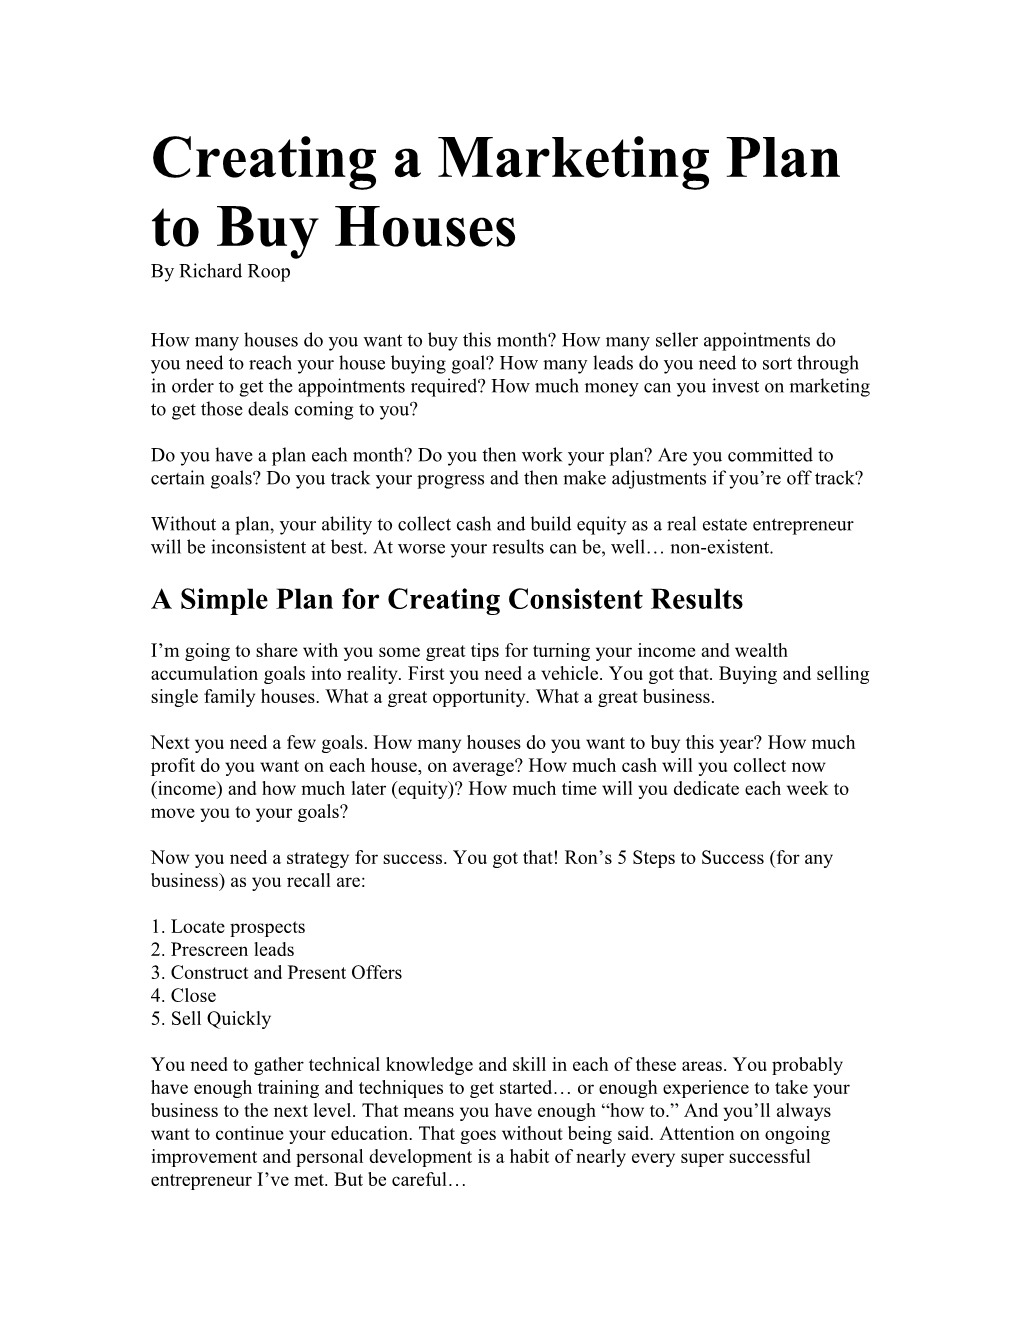 Creating a Supercharged Marketing Plan to Buy Houses